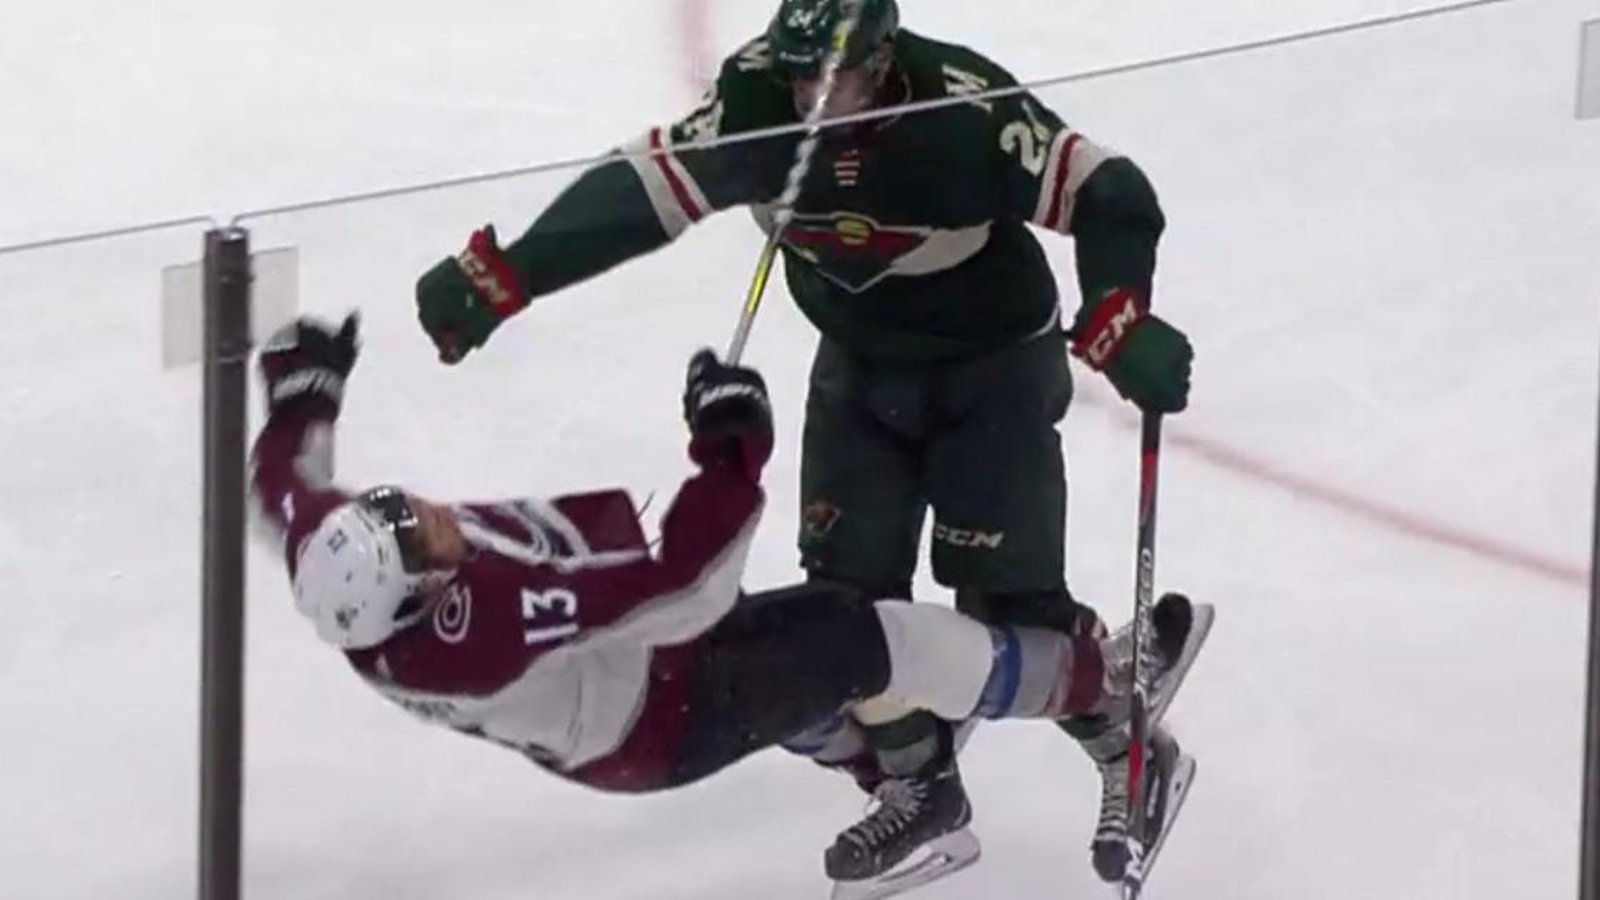 Must See: Dumba lures Kerfoot into a bone crushing hit.